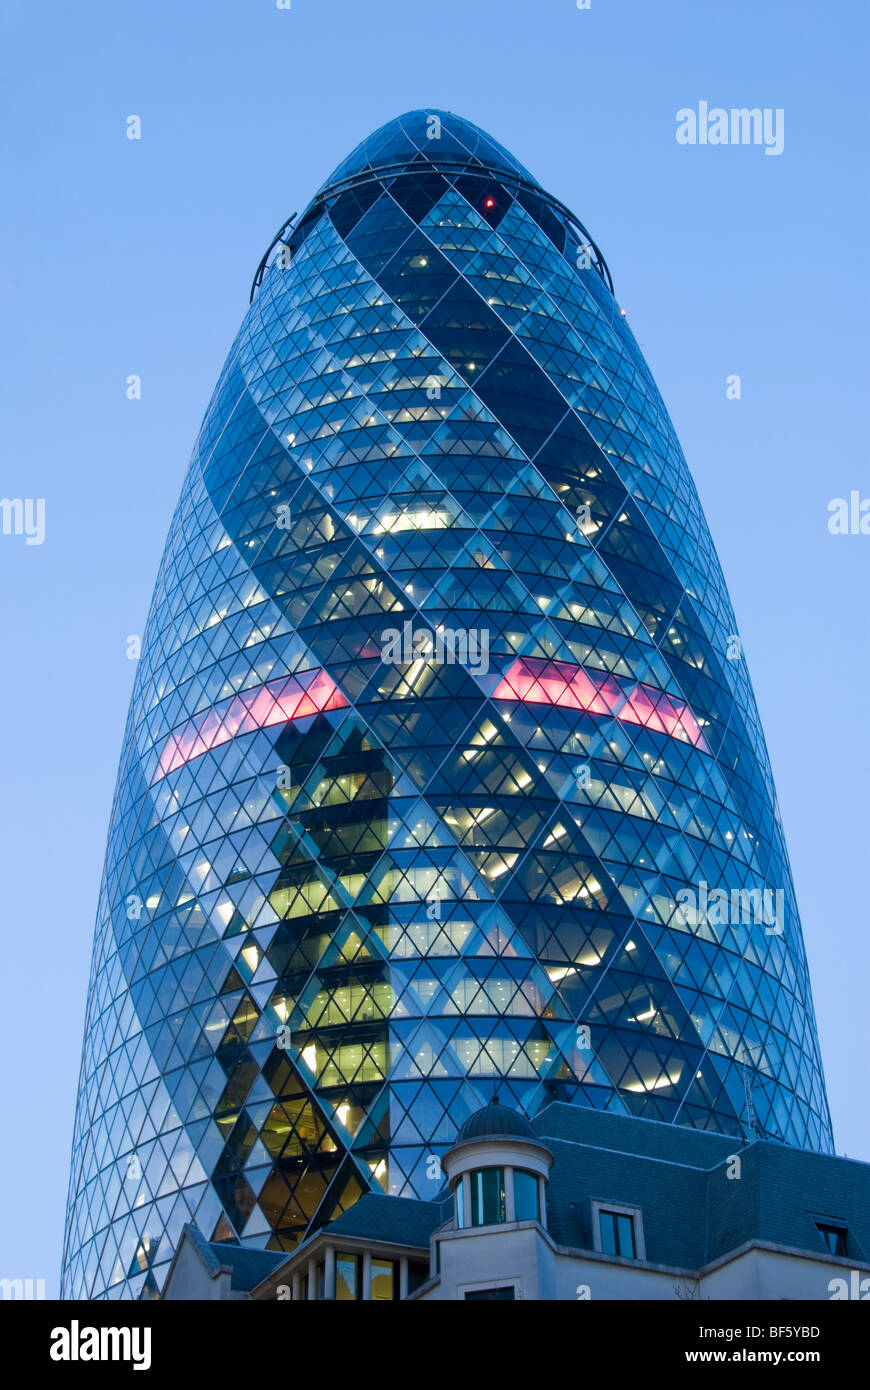 The Swiss Re Tower in London Stock Photo - Alamy